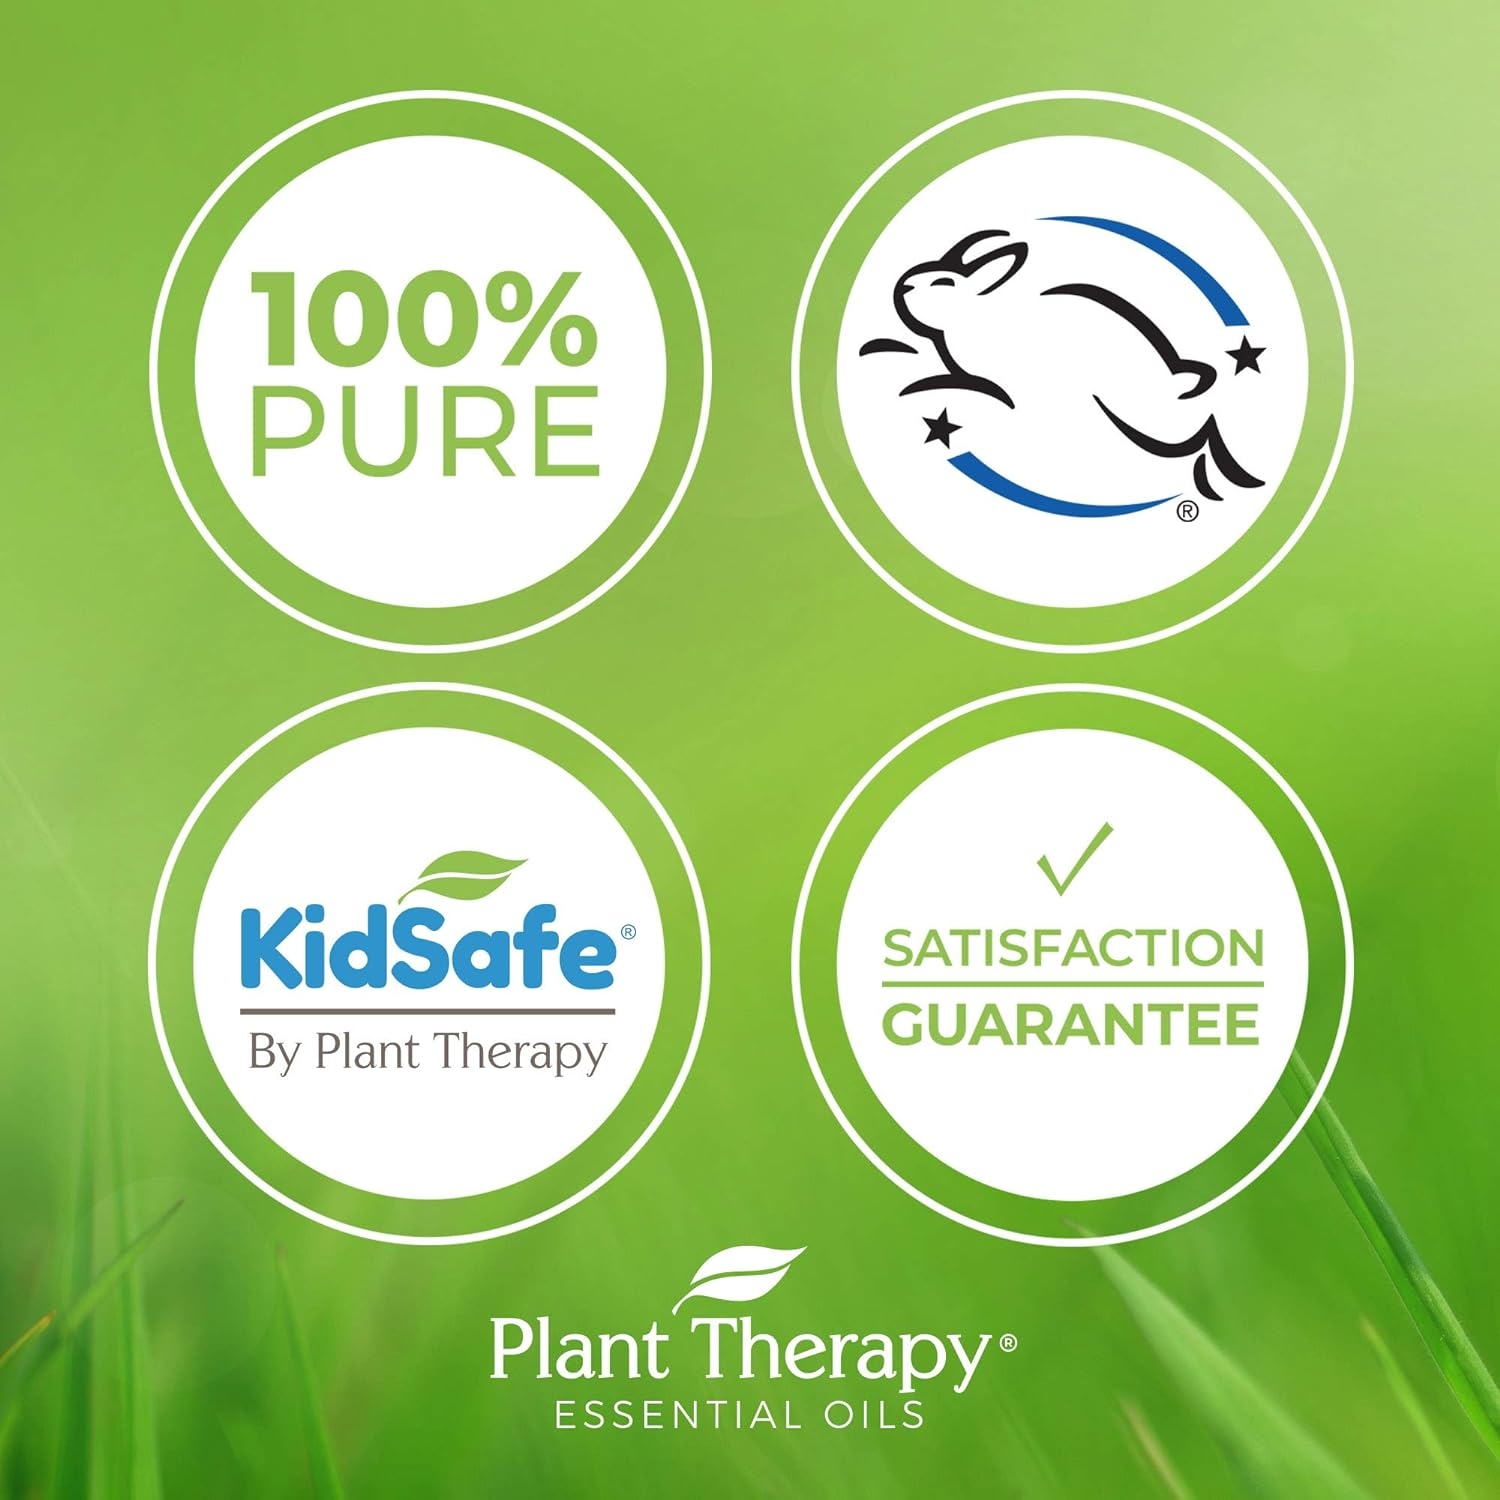 Plant Therapy Essential Oils KidSafe Wellness Sampler Boxed Set Includes Germ Destroyer, Immune Boom, Sniffle Stopper 100% Pure, Undiluted, Natural Aromatherapy 10 mL (1/3 oz)